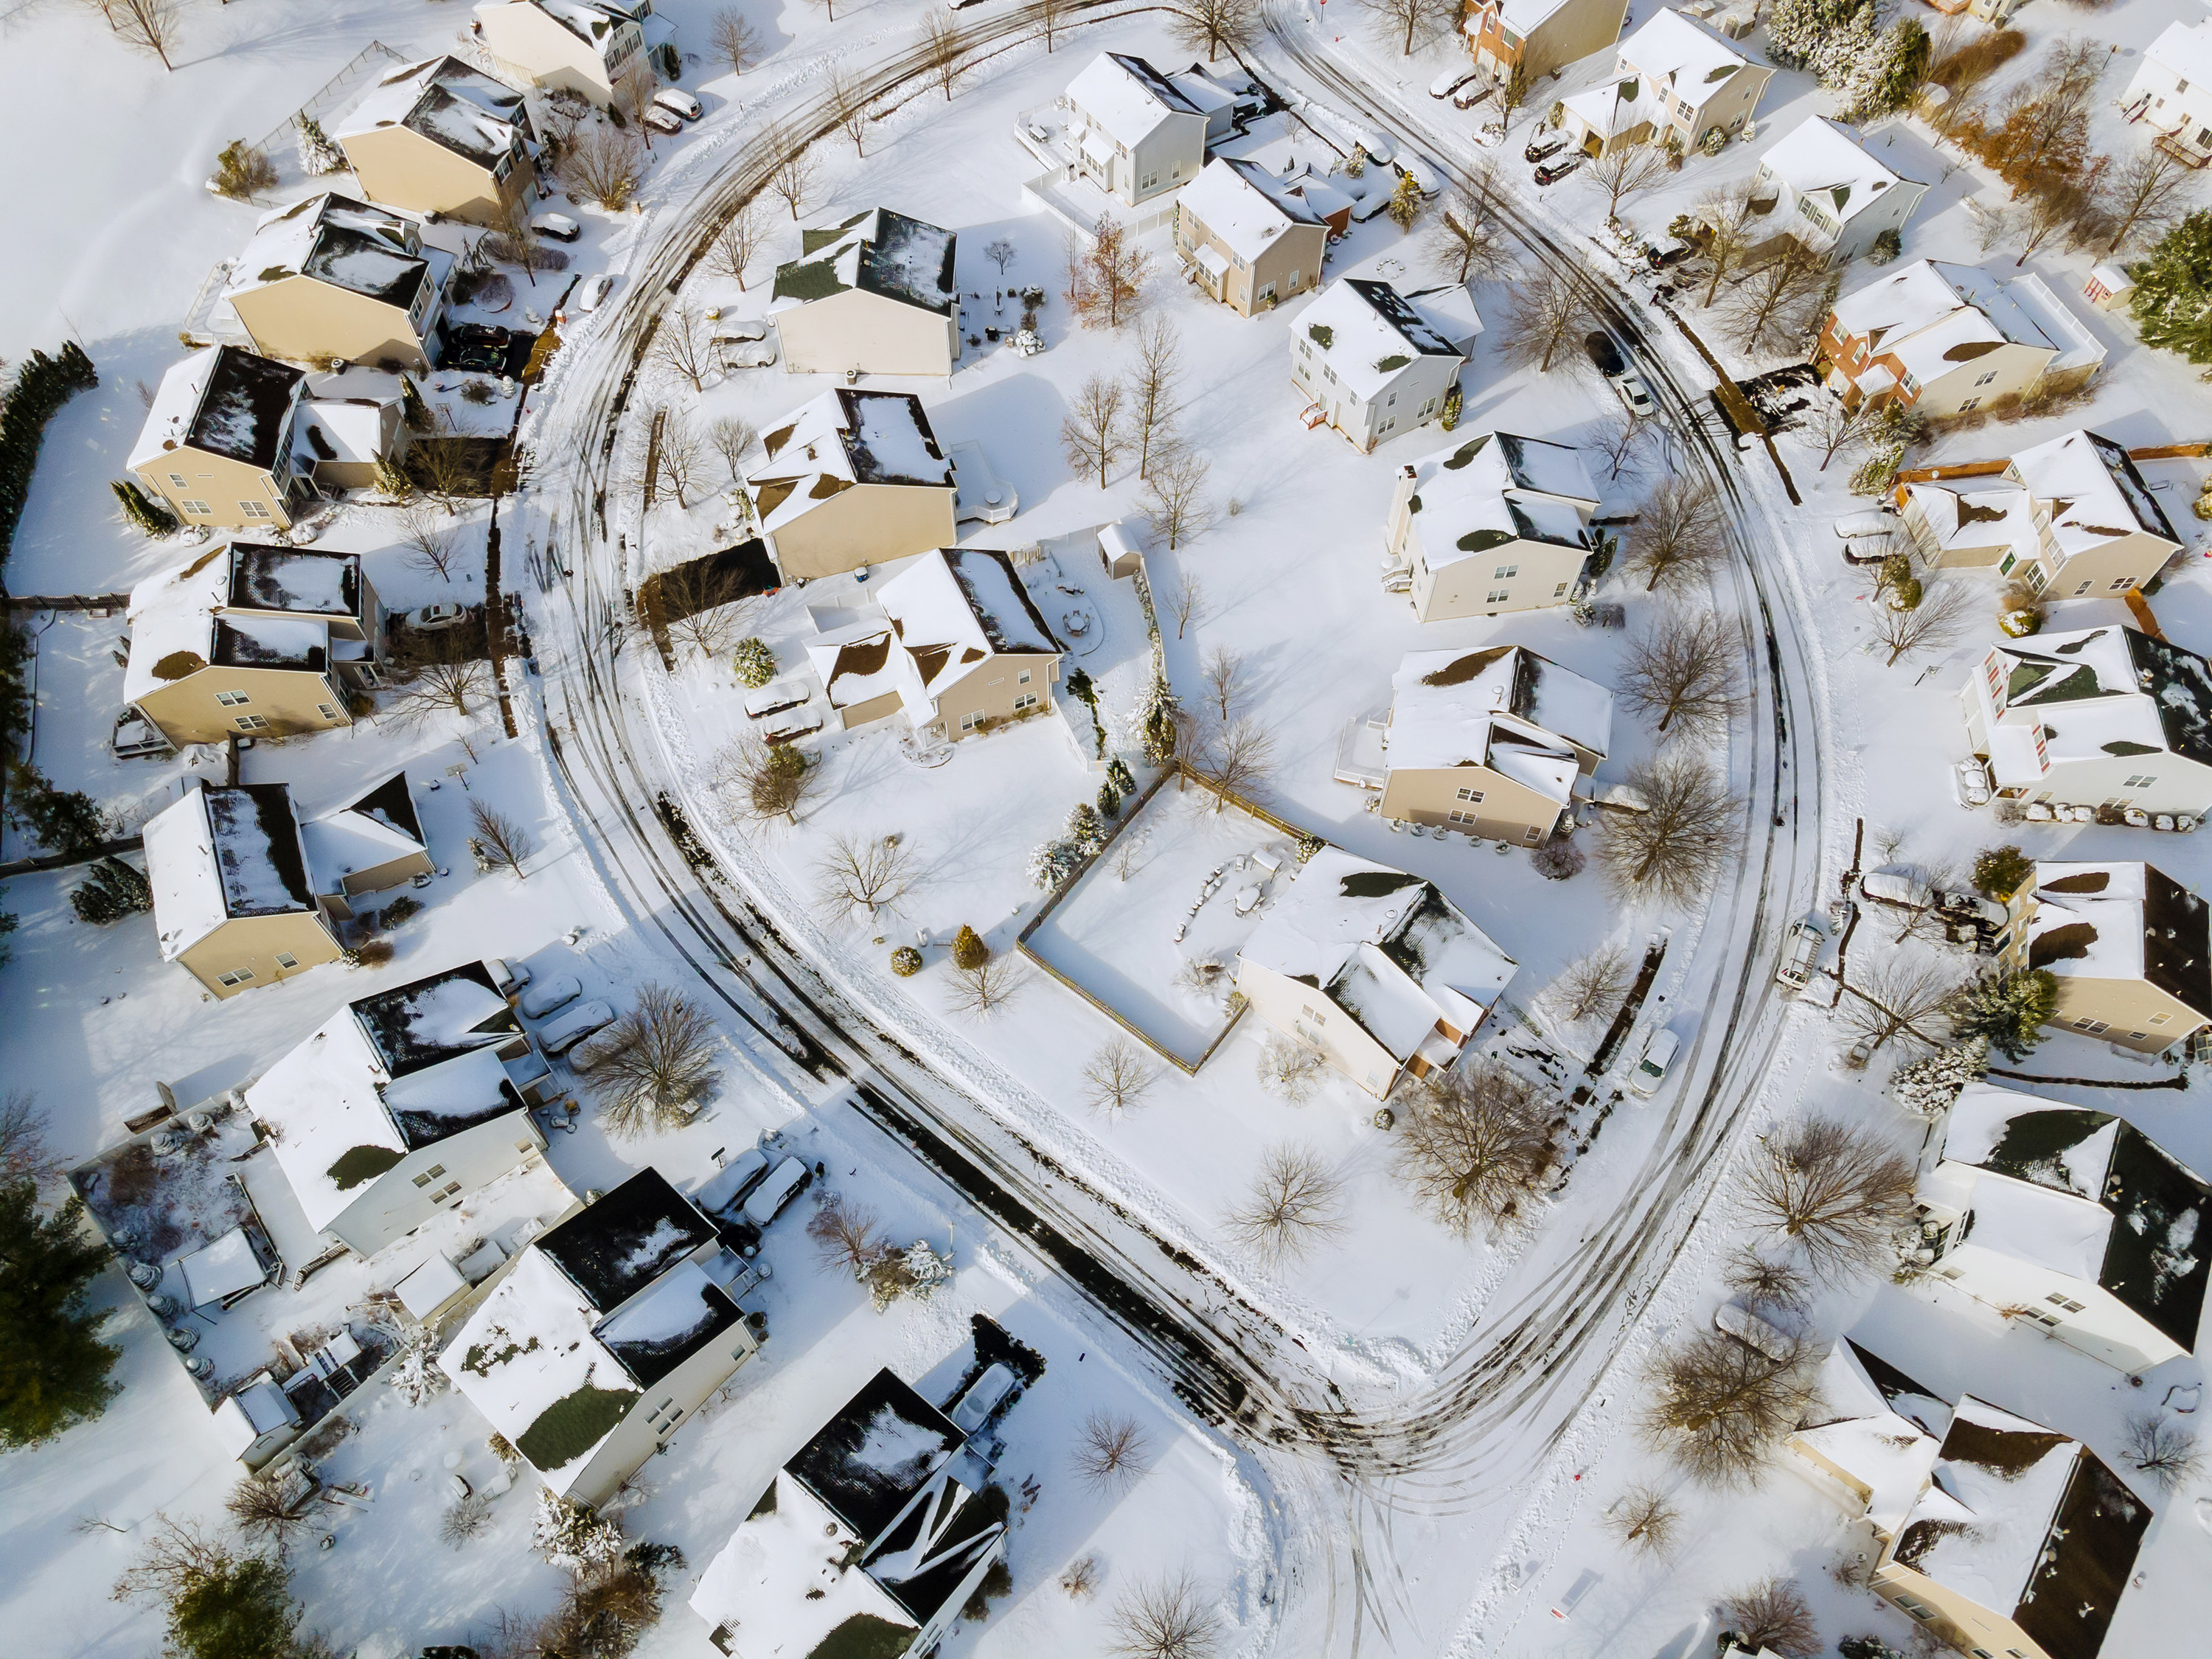 Amazing winter aerial view of small town the after snowfall in Pennsylvania US